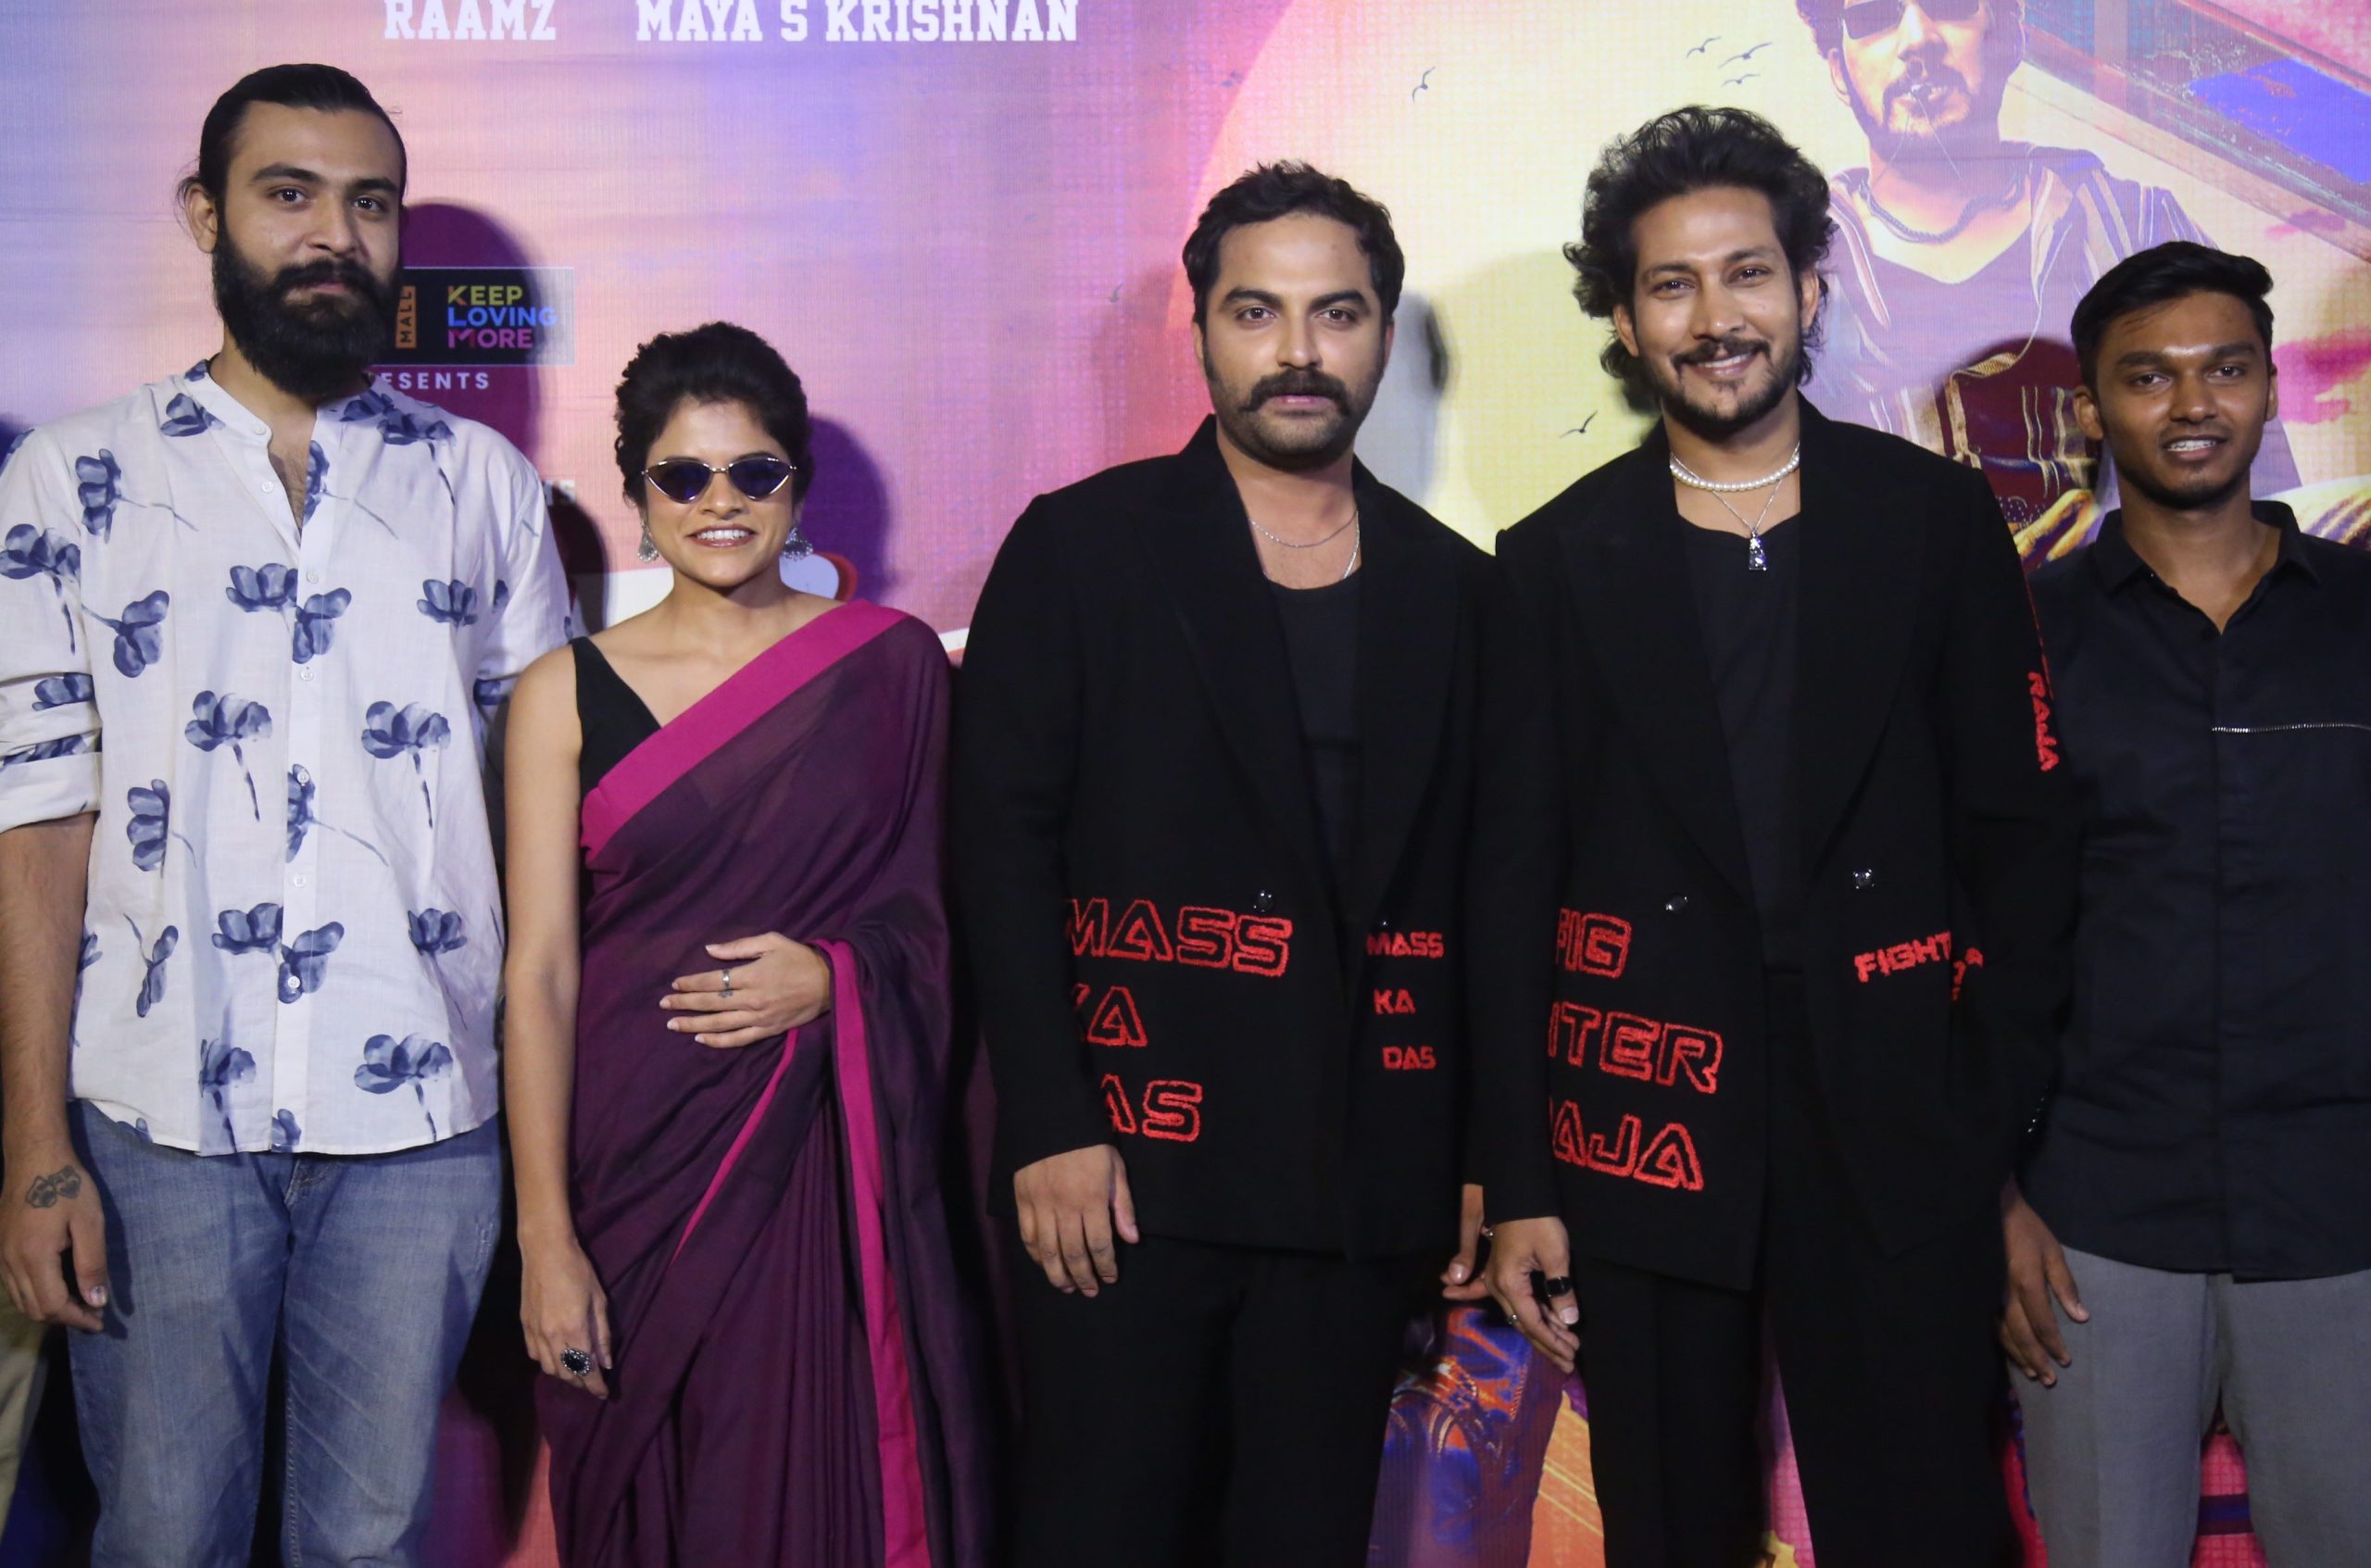 Fighter Raja Movie Teaser Launched